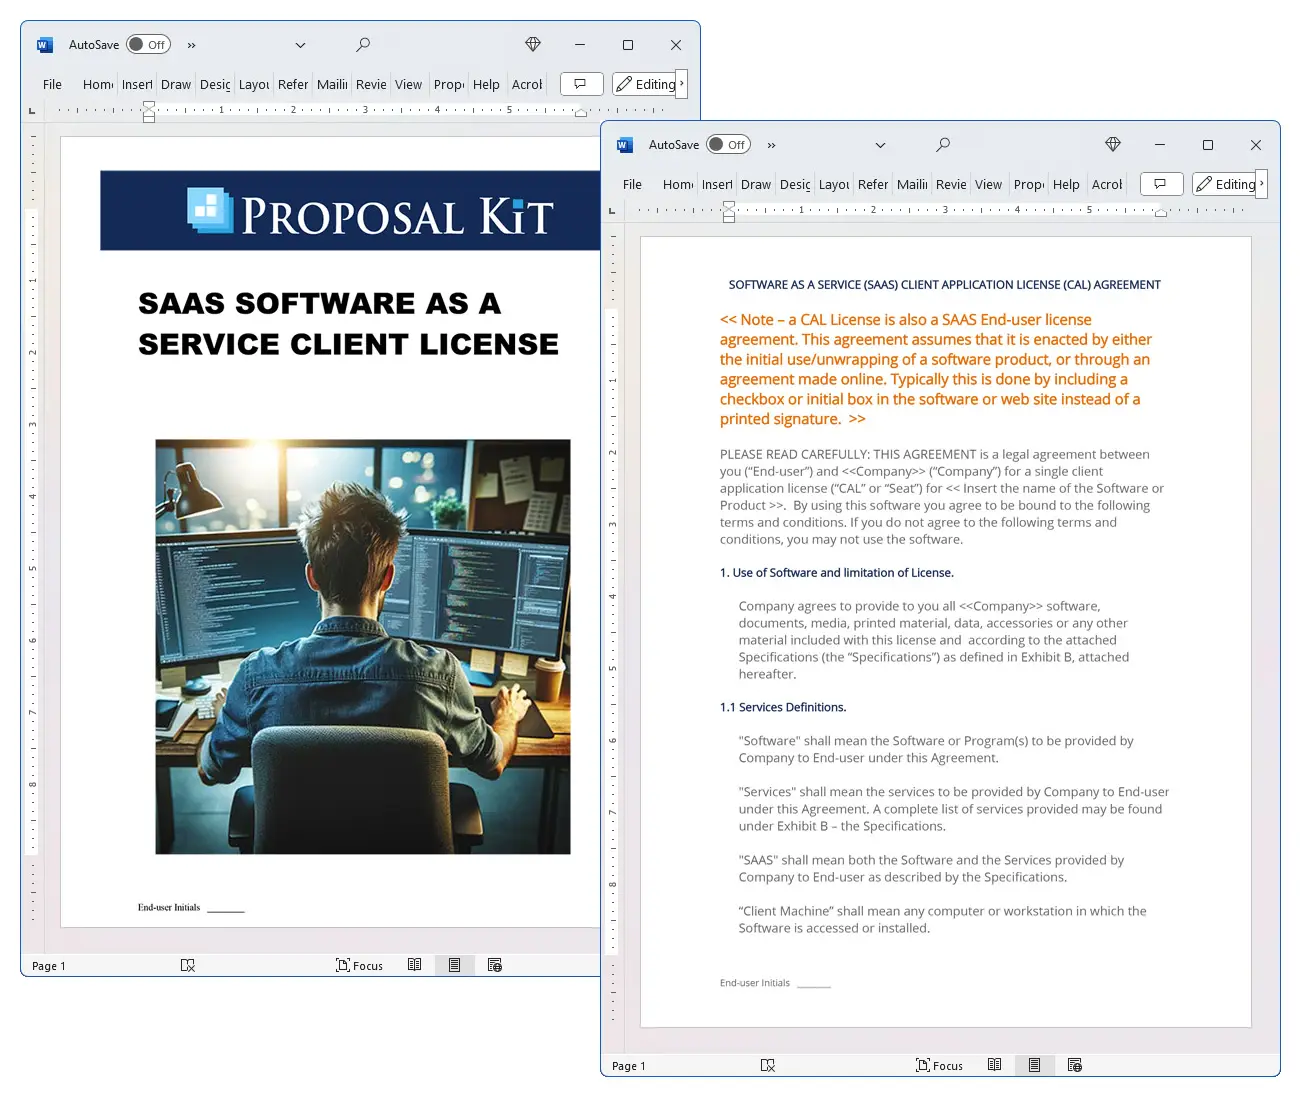 SAAS Software as a Service Client License Concepts